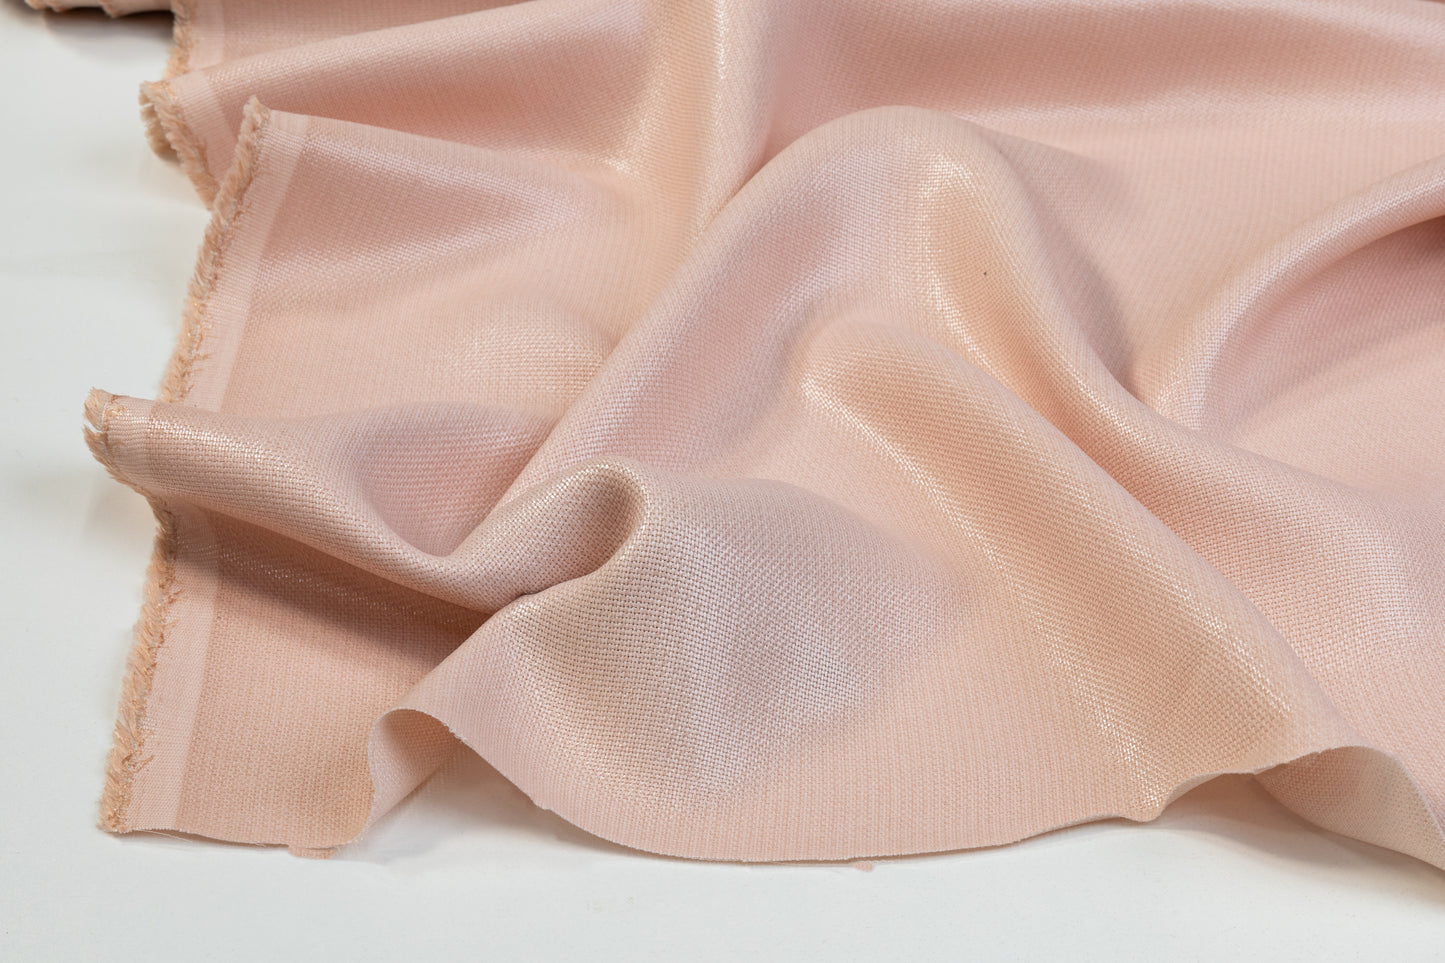 Laminated Linen - Baby Pink